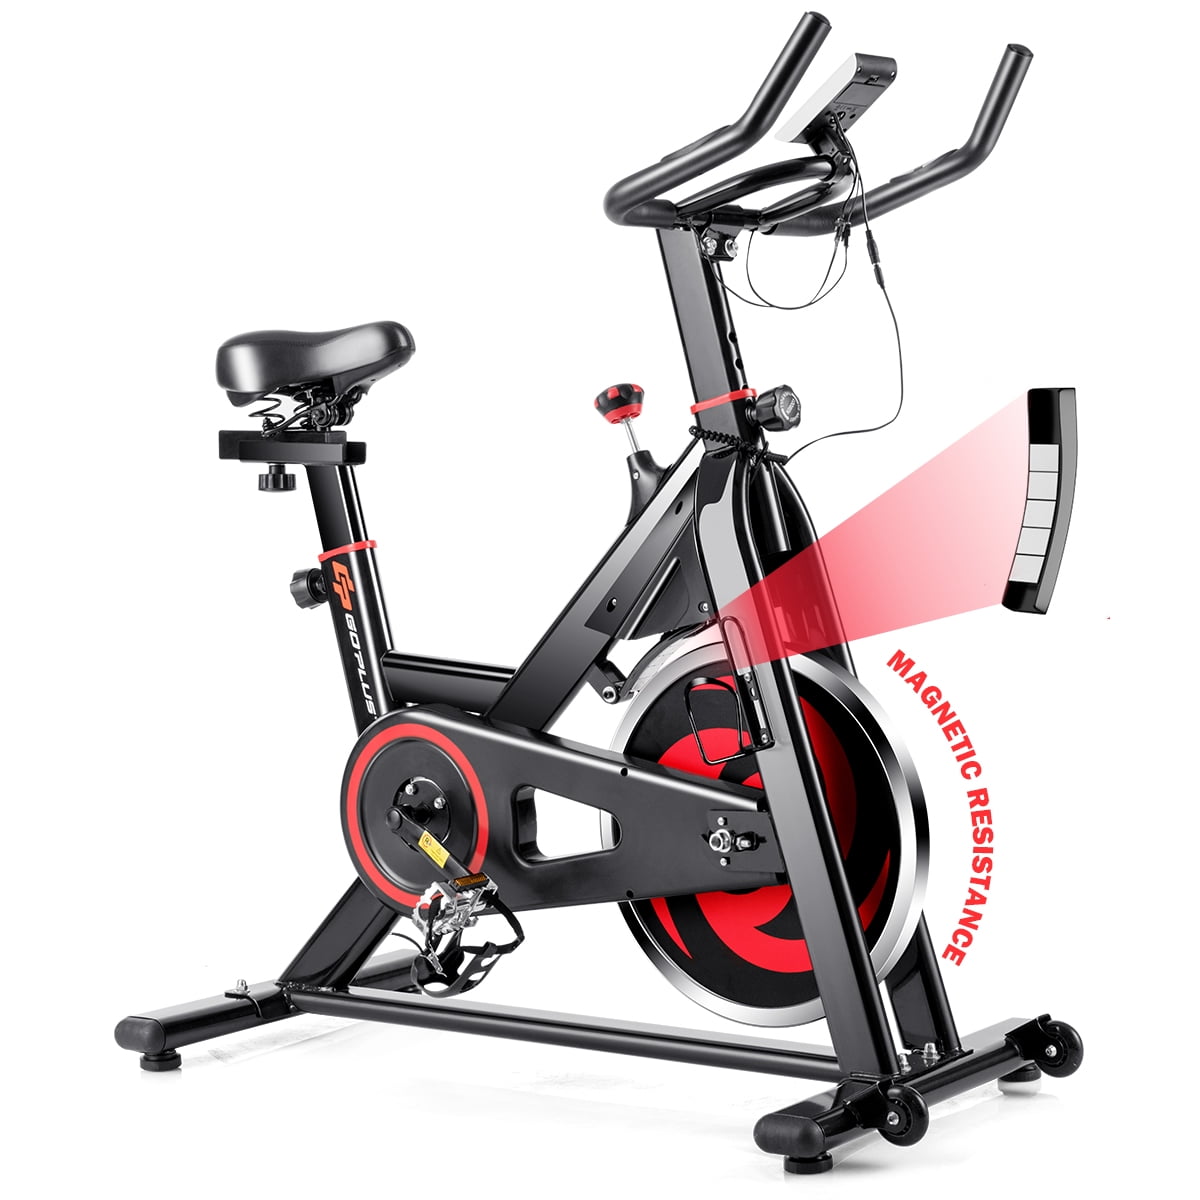 Details about   Bicycle Cycling Fitness Gym Exercise Stationary Bike Cardio Workout Home F2 